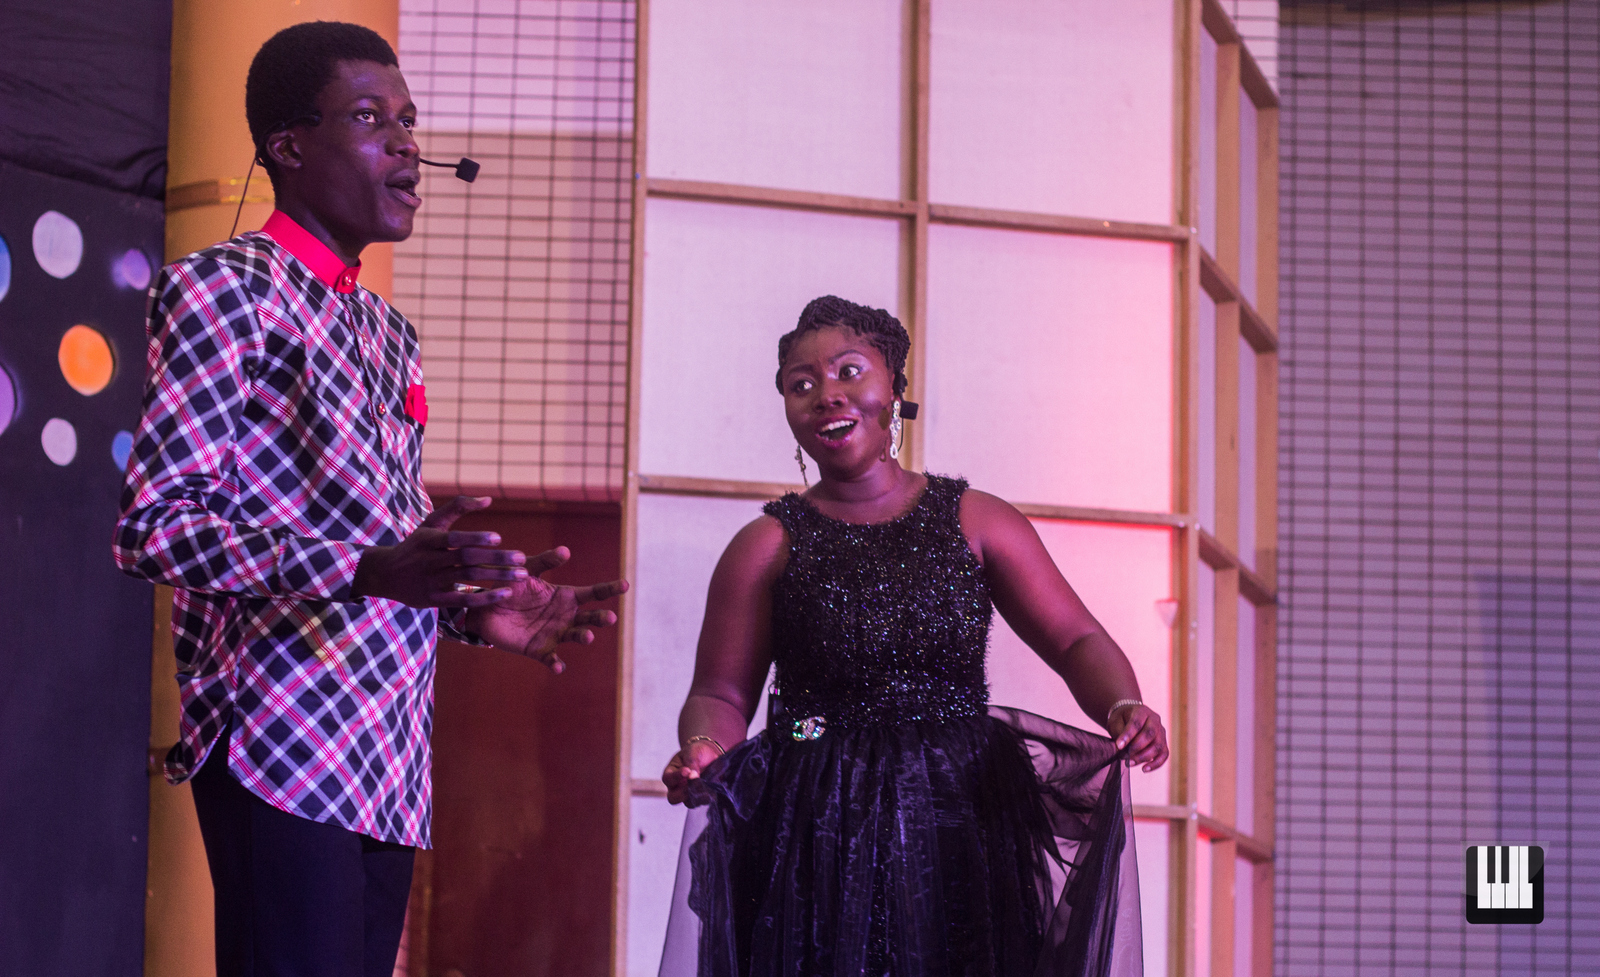 Classical Laughs: The Genius Behind the Music Jesse got in touch with Elizabeth Naa Ashami Boakye, soloist with LUMINA, member of Harmonious Chorale and Music Director and Talent Manager at Extreme Productions, the producers of Classical Laughs.